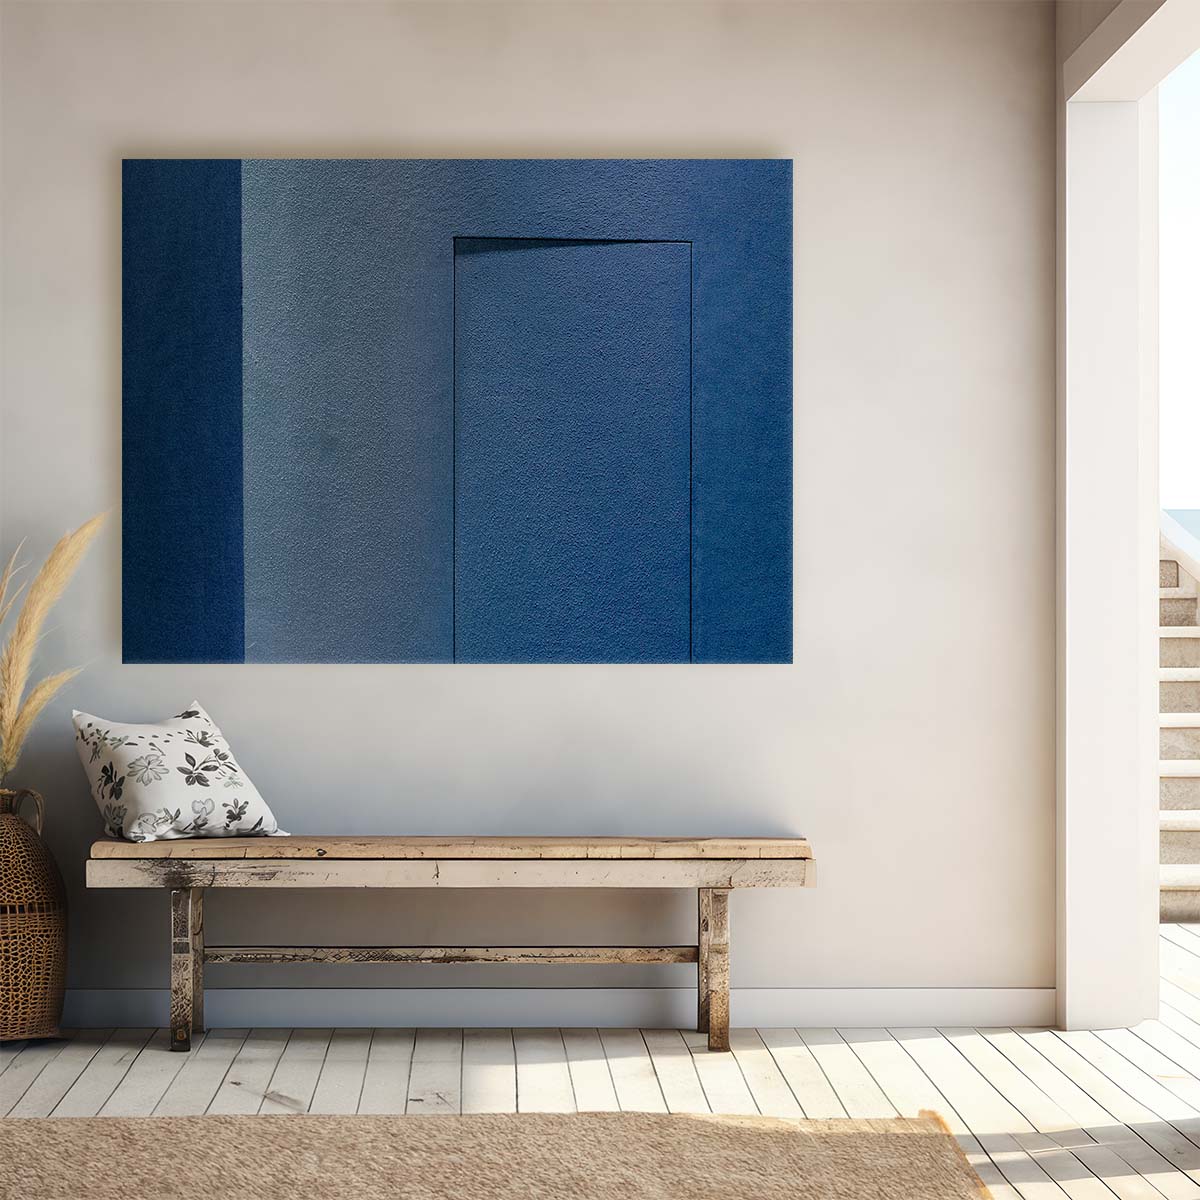 Minimalist Blue Doorway Geometry Abstract Wall Art by Luxuriance Designs. Made in USA.